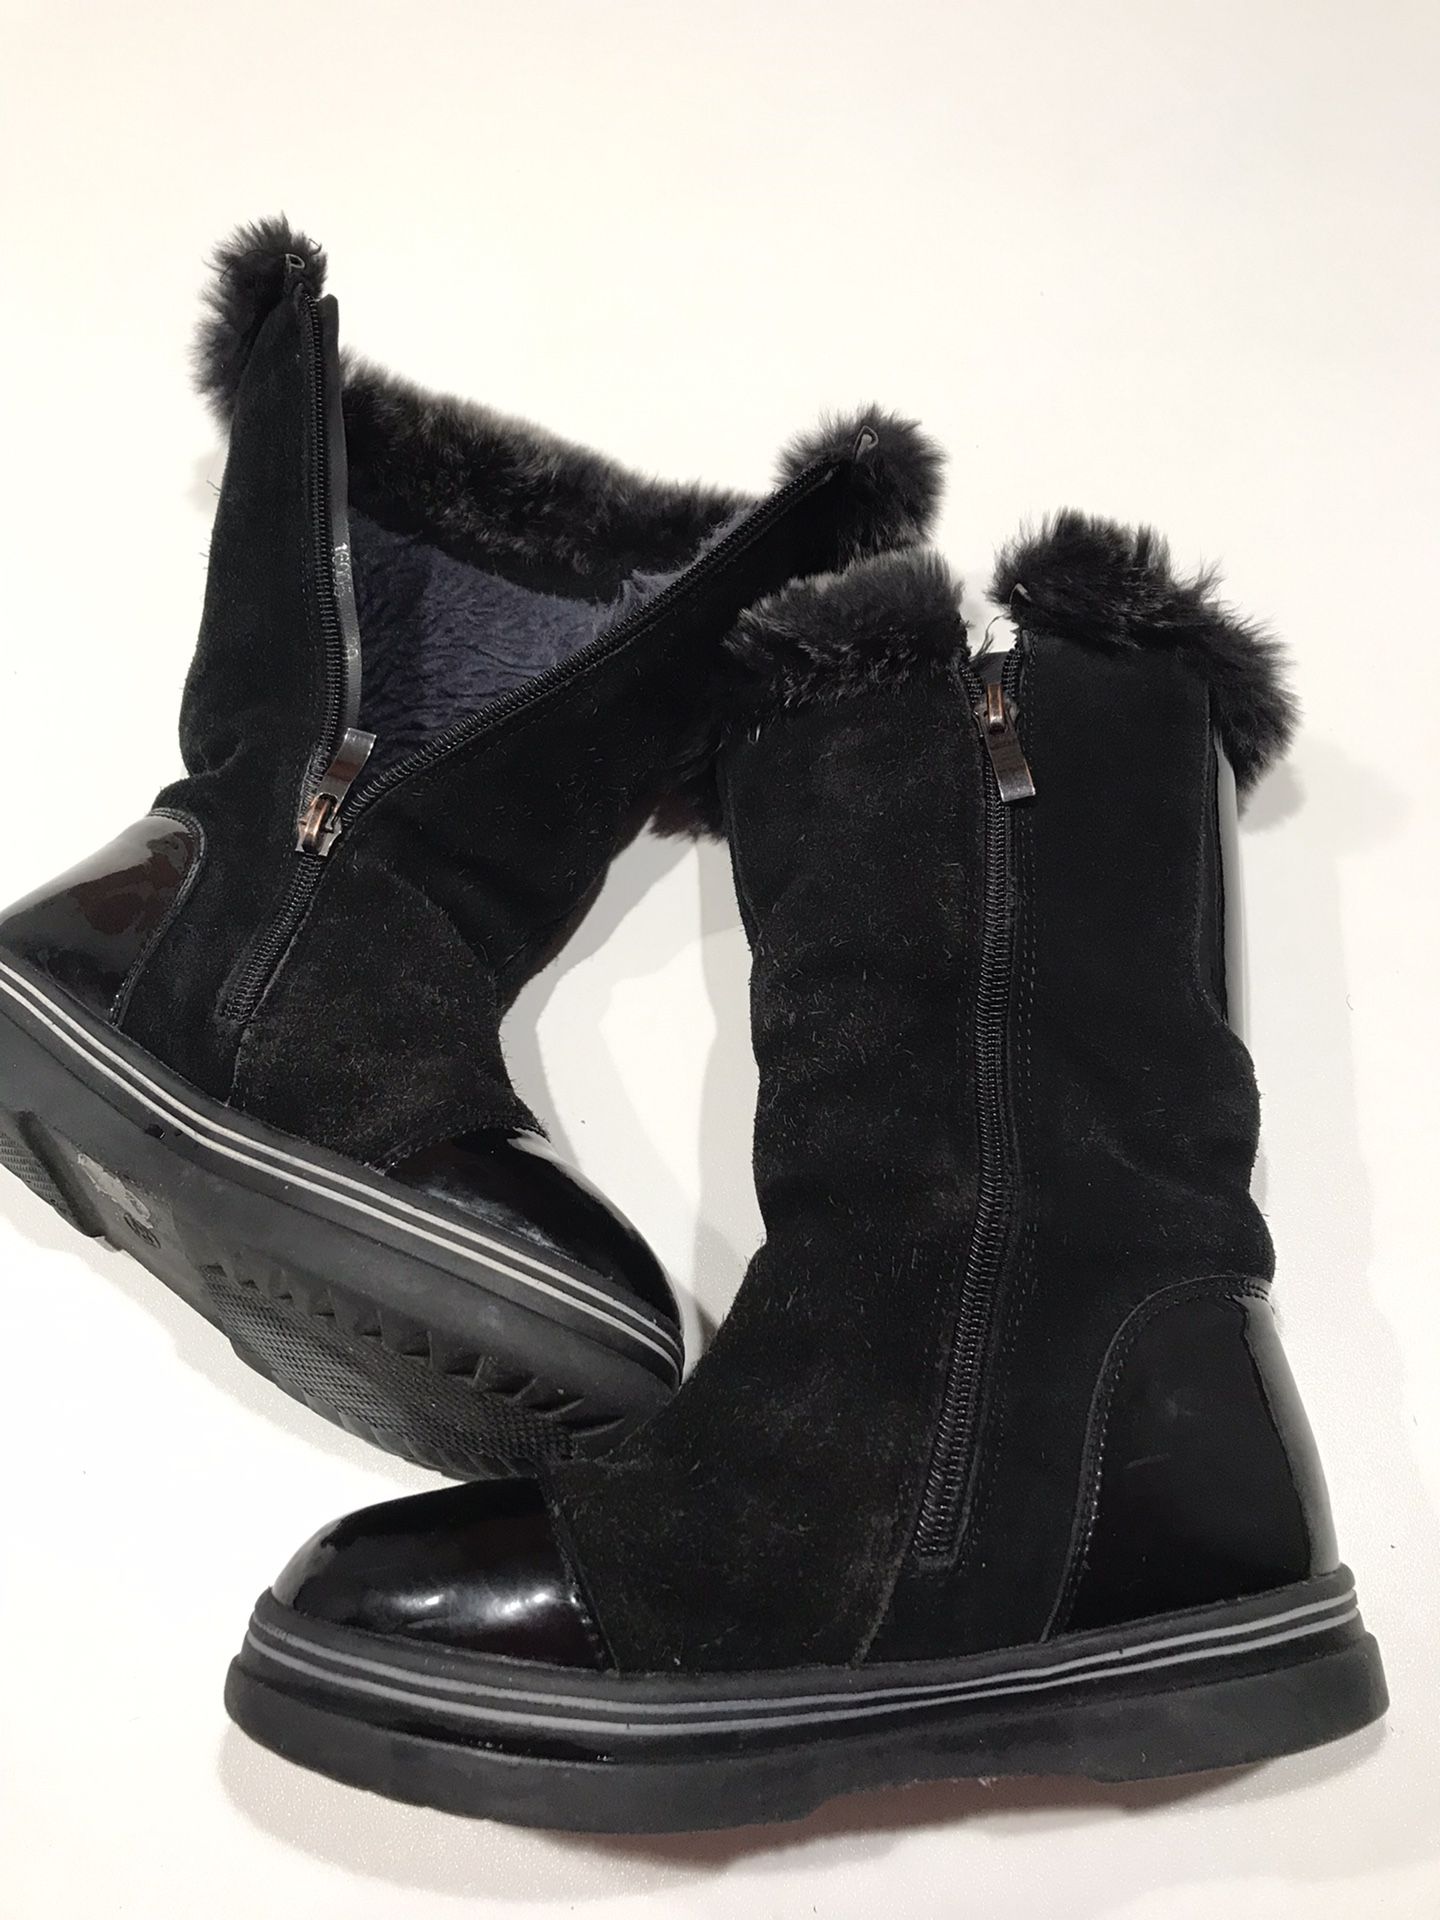 VITACCI Girl’s Black Fur Lined Leather Suede Boots, 29